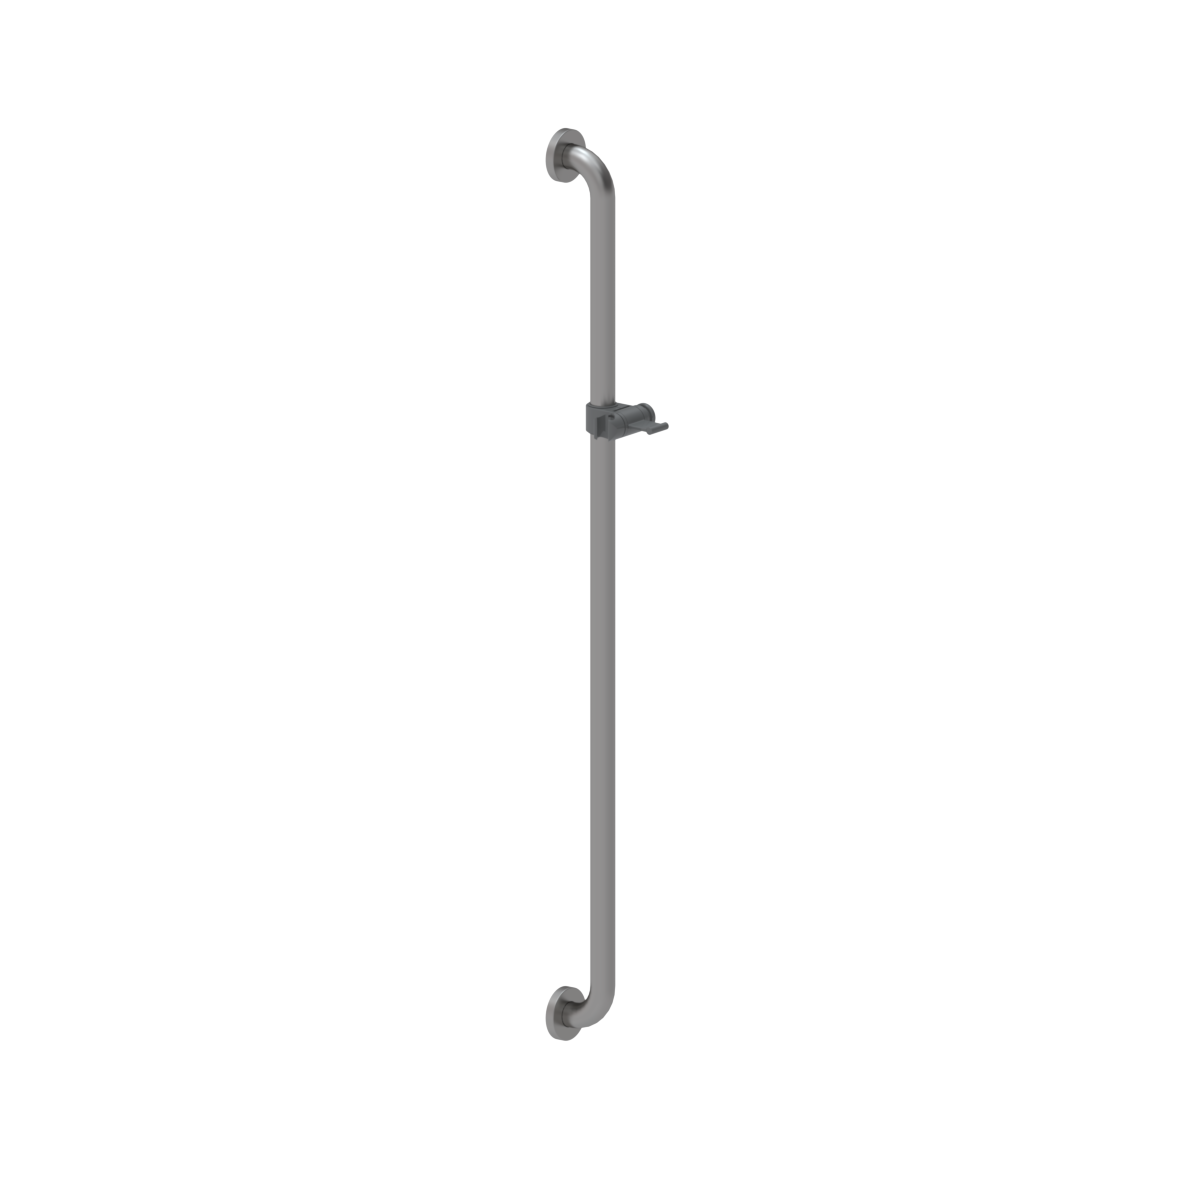 Inox Care Shower head rail, left and right, 1100 mm, Stainless steel, shower head holder, colour dark grey (018)